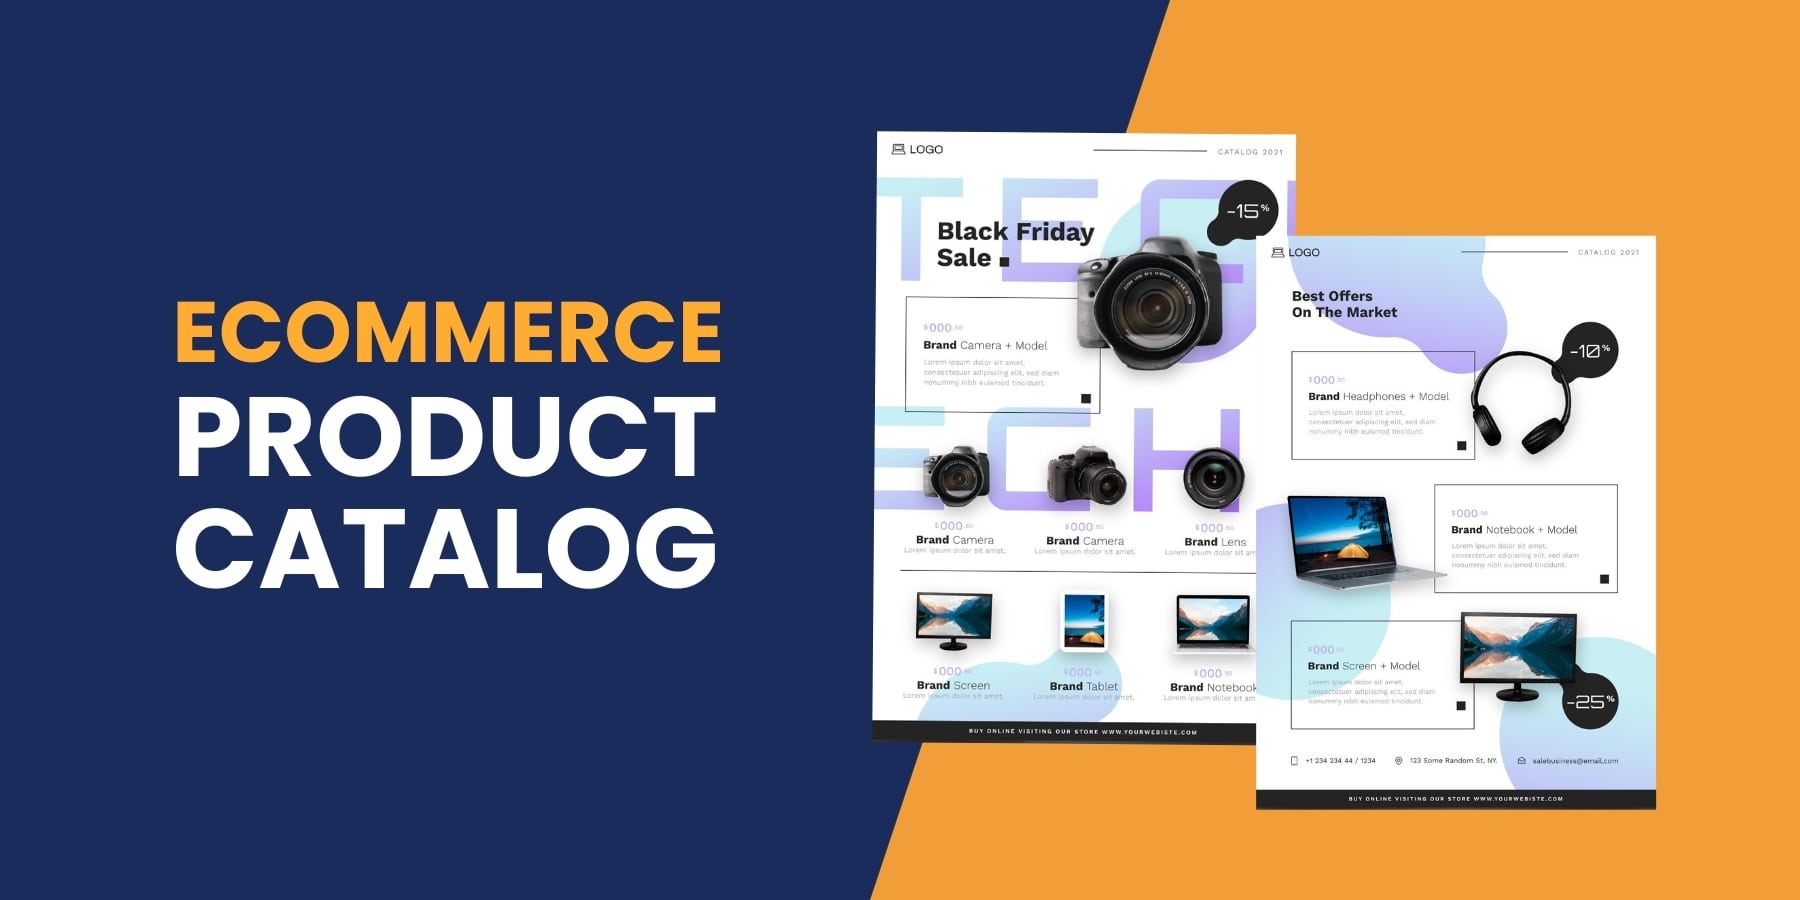 vserve | What is The Anatomy of a Winning Ecommerce Product Catalog